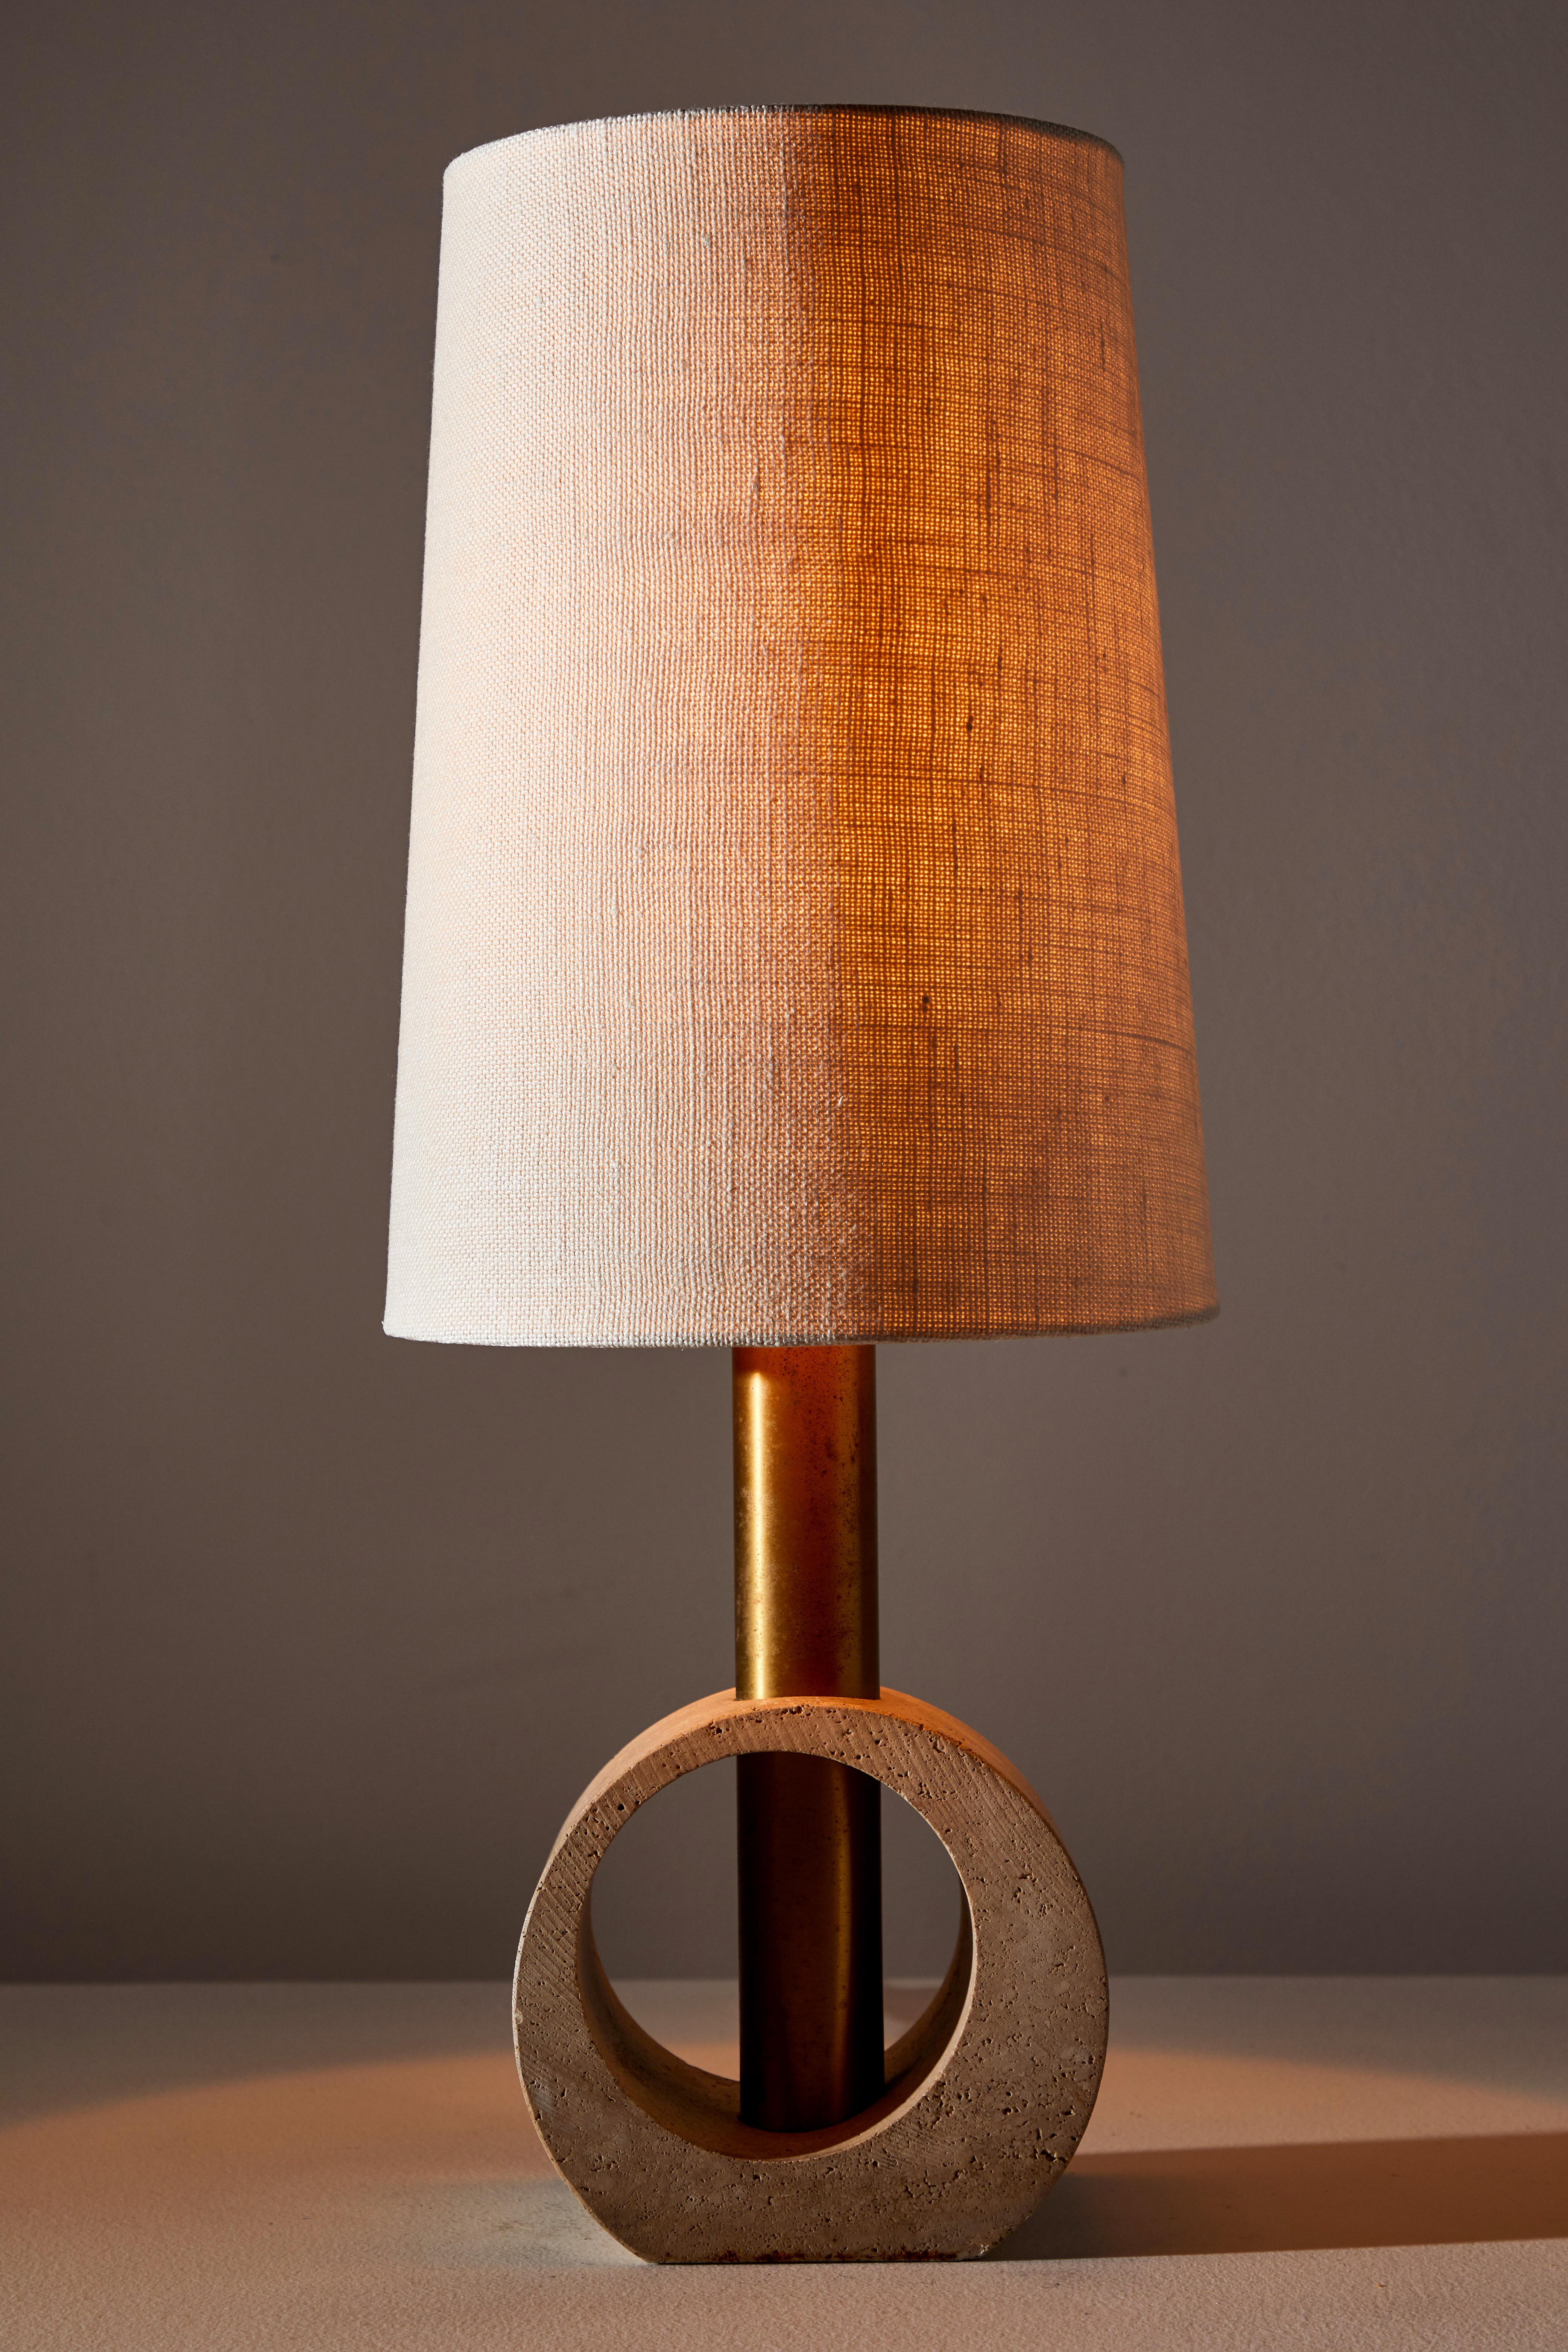 Table lamp. Designed and manufactured in Italy, circa 1970s. Travertine with custom linen shade and brass stem. Original cord. Takes one E27 60w maximum bulb. Bulbs provided as a one time courtesy.